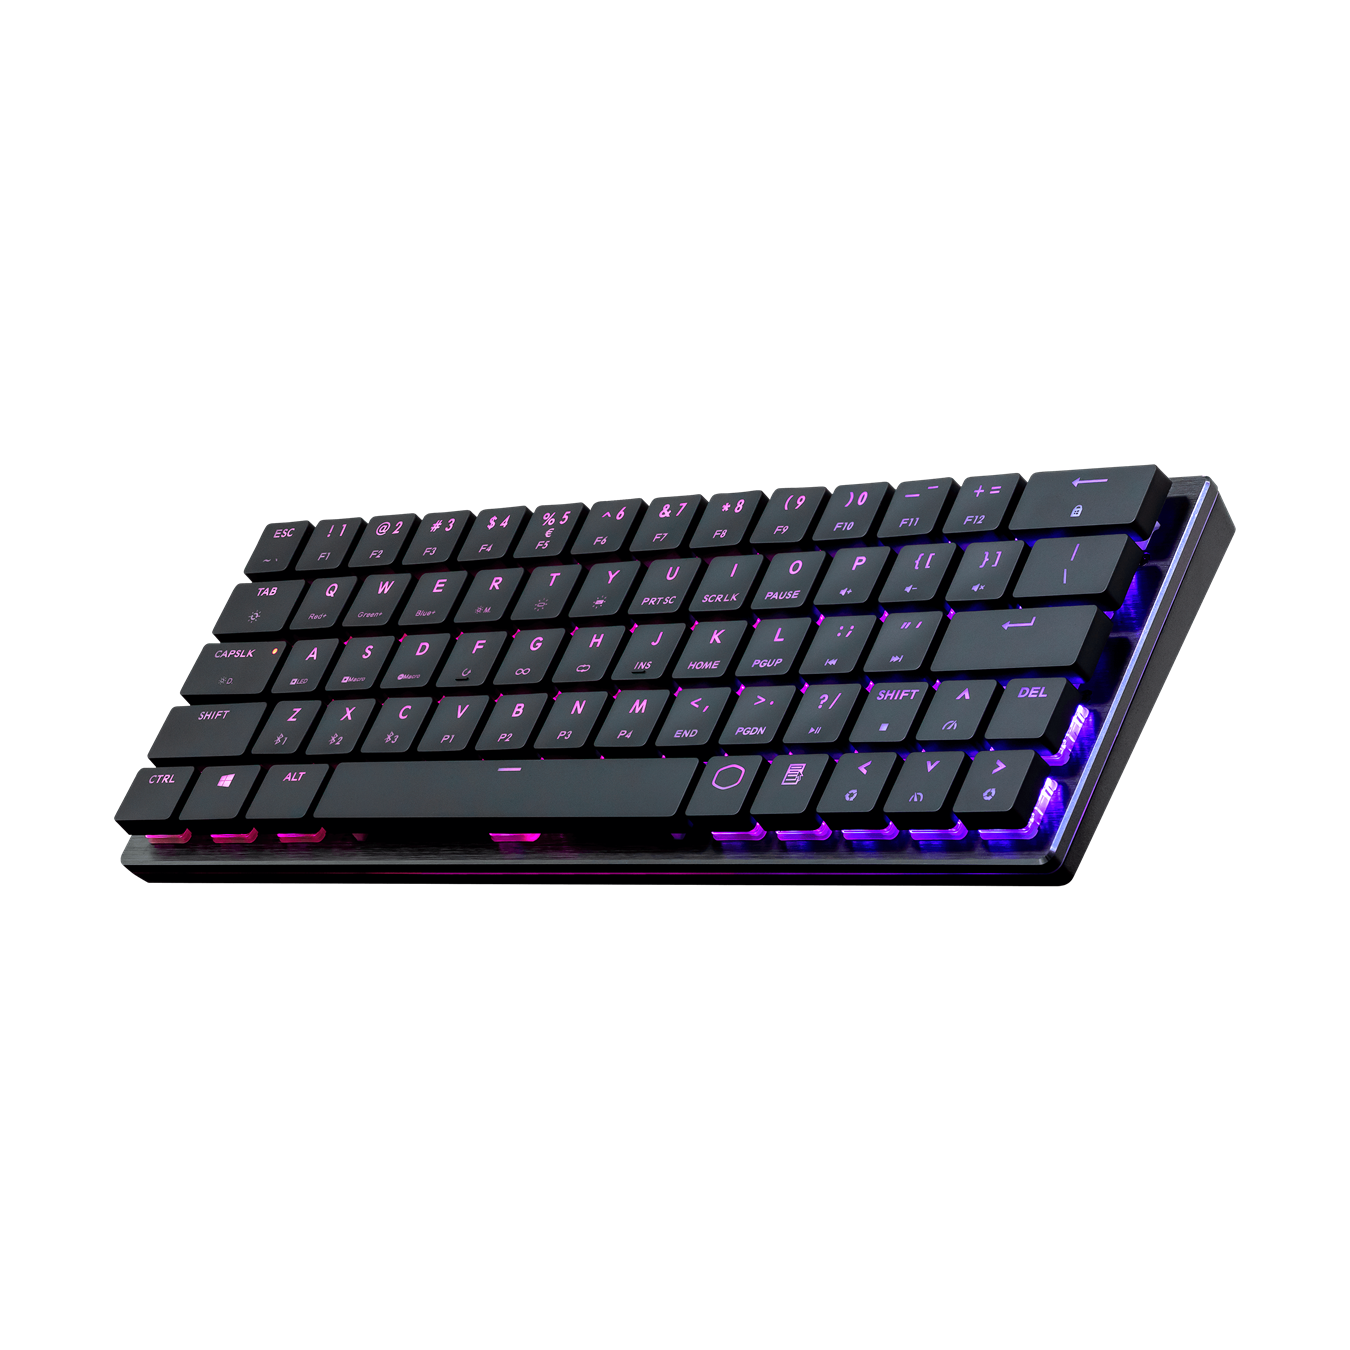 SK621 Low Profile Wireless Mechanical Keyboard - takes the classic slim, minimal design of the most popular chiclet keyboard and injects it with the signature Cooler Master mix of flair and functionality